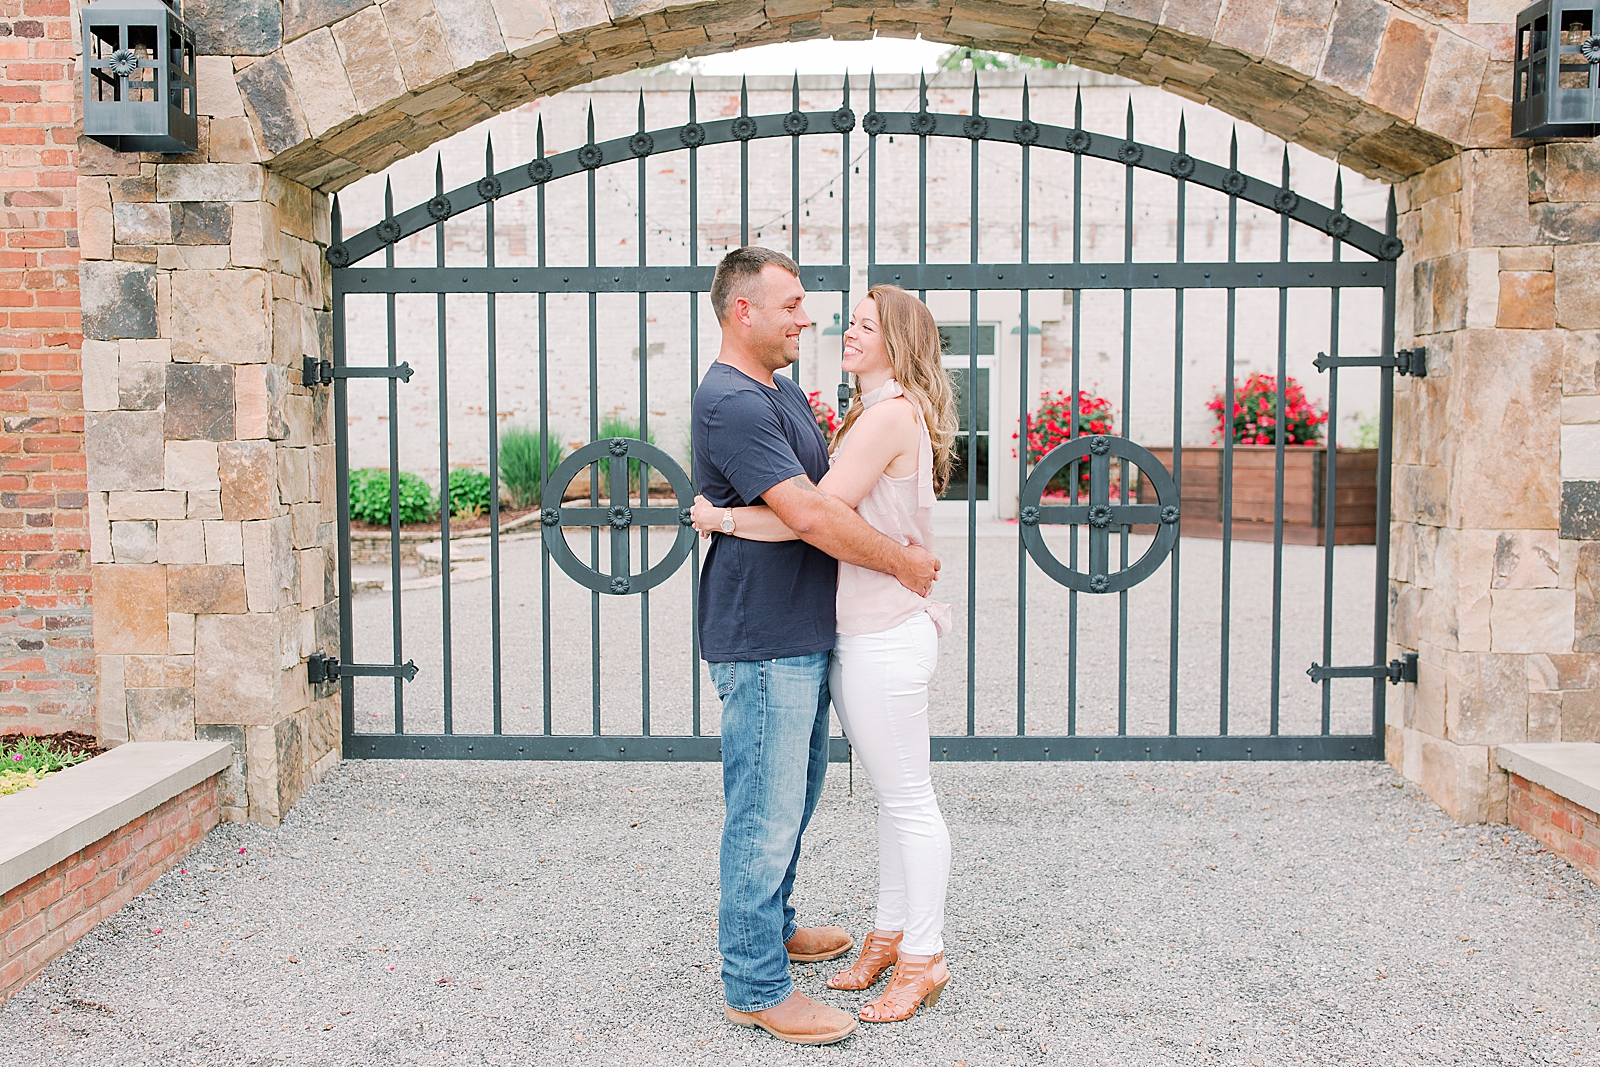 Hackney Warehouse Engagement Session Couple smiling at each other in front of iron gate Photo